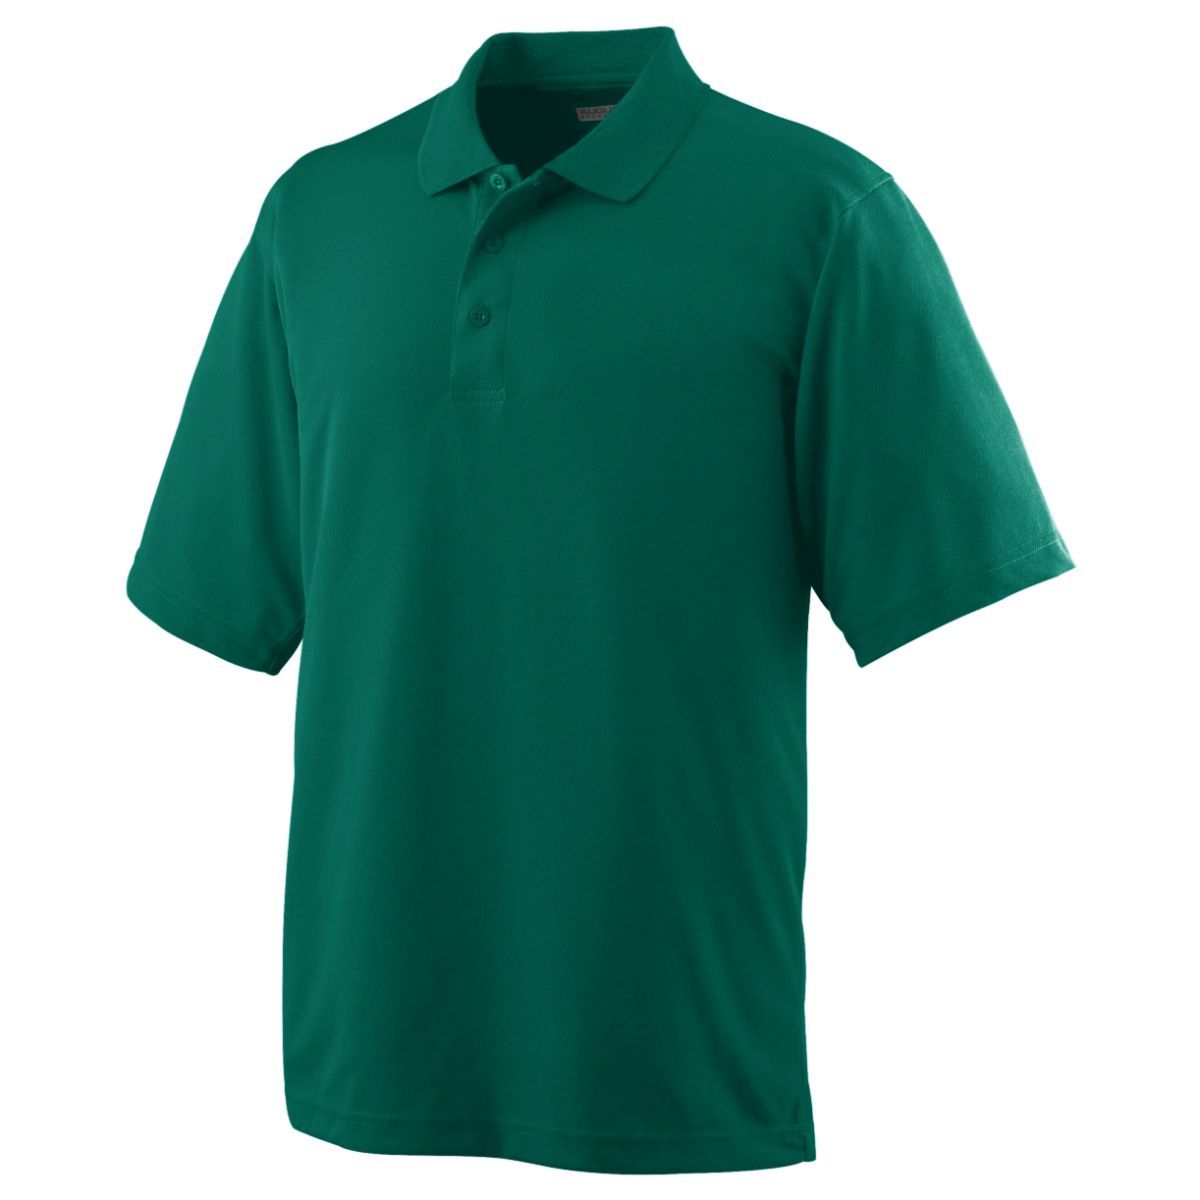 Augusta Sportswear Wicking Mesh Polo in Dark Green  -Part of the Adult, Adult-Polos, Polos, Augusta-Products, Tennis, Shirts product lines at KanaleyCreations.com